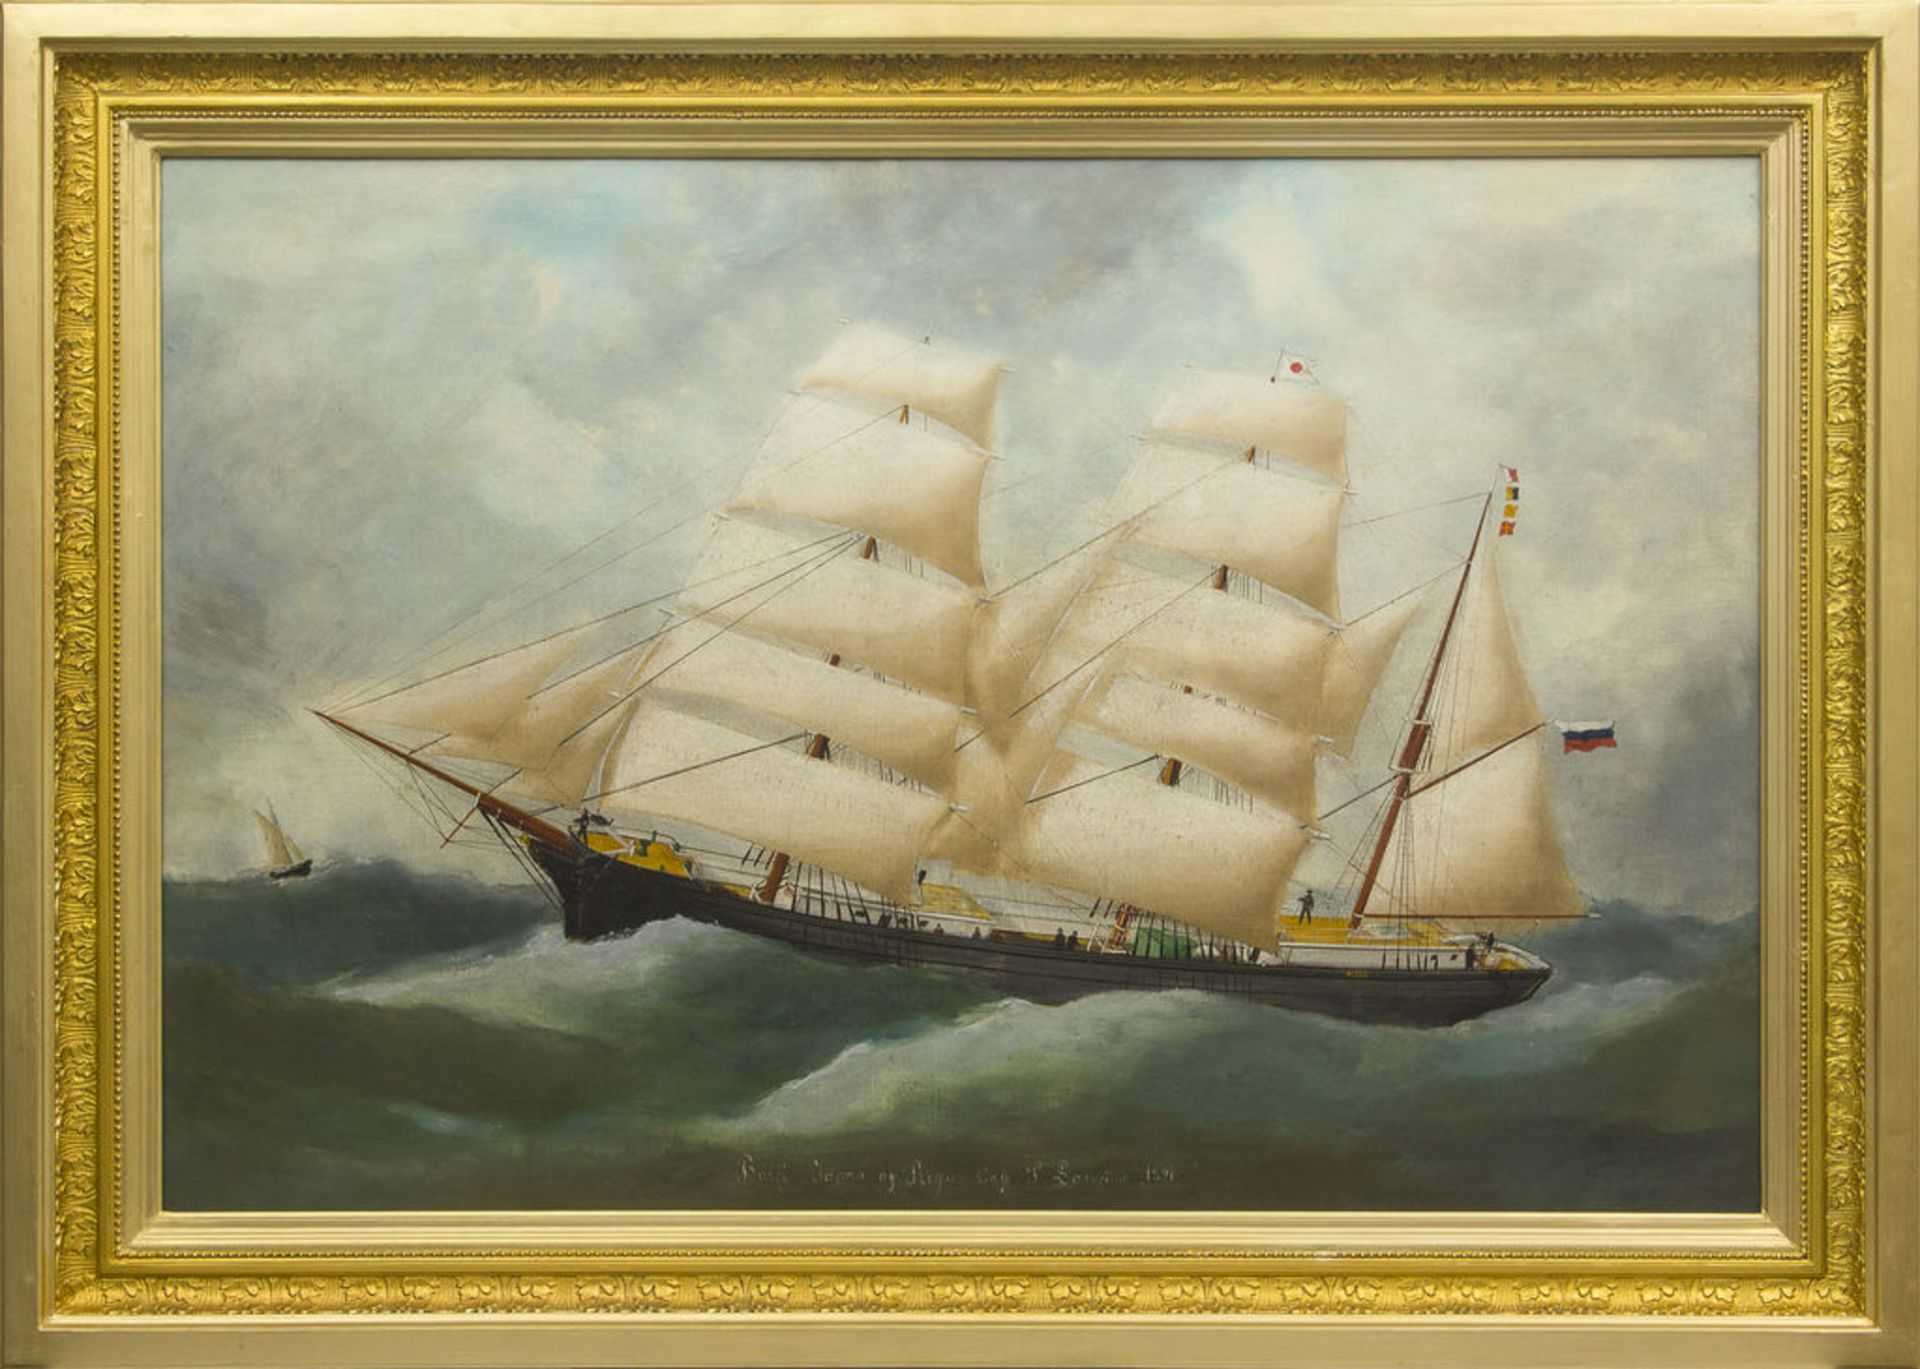 Captain painting - Sailing boat "Japan" from Riga by Captain Laivins 